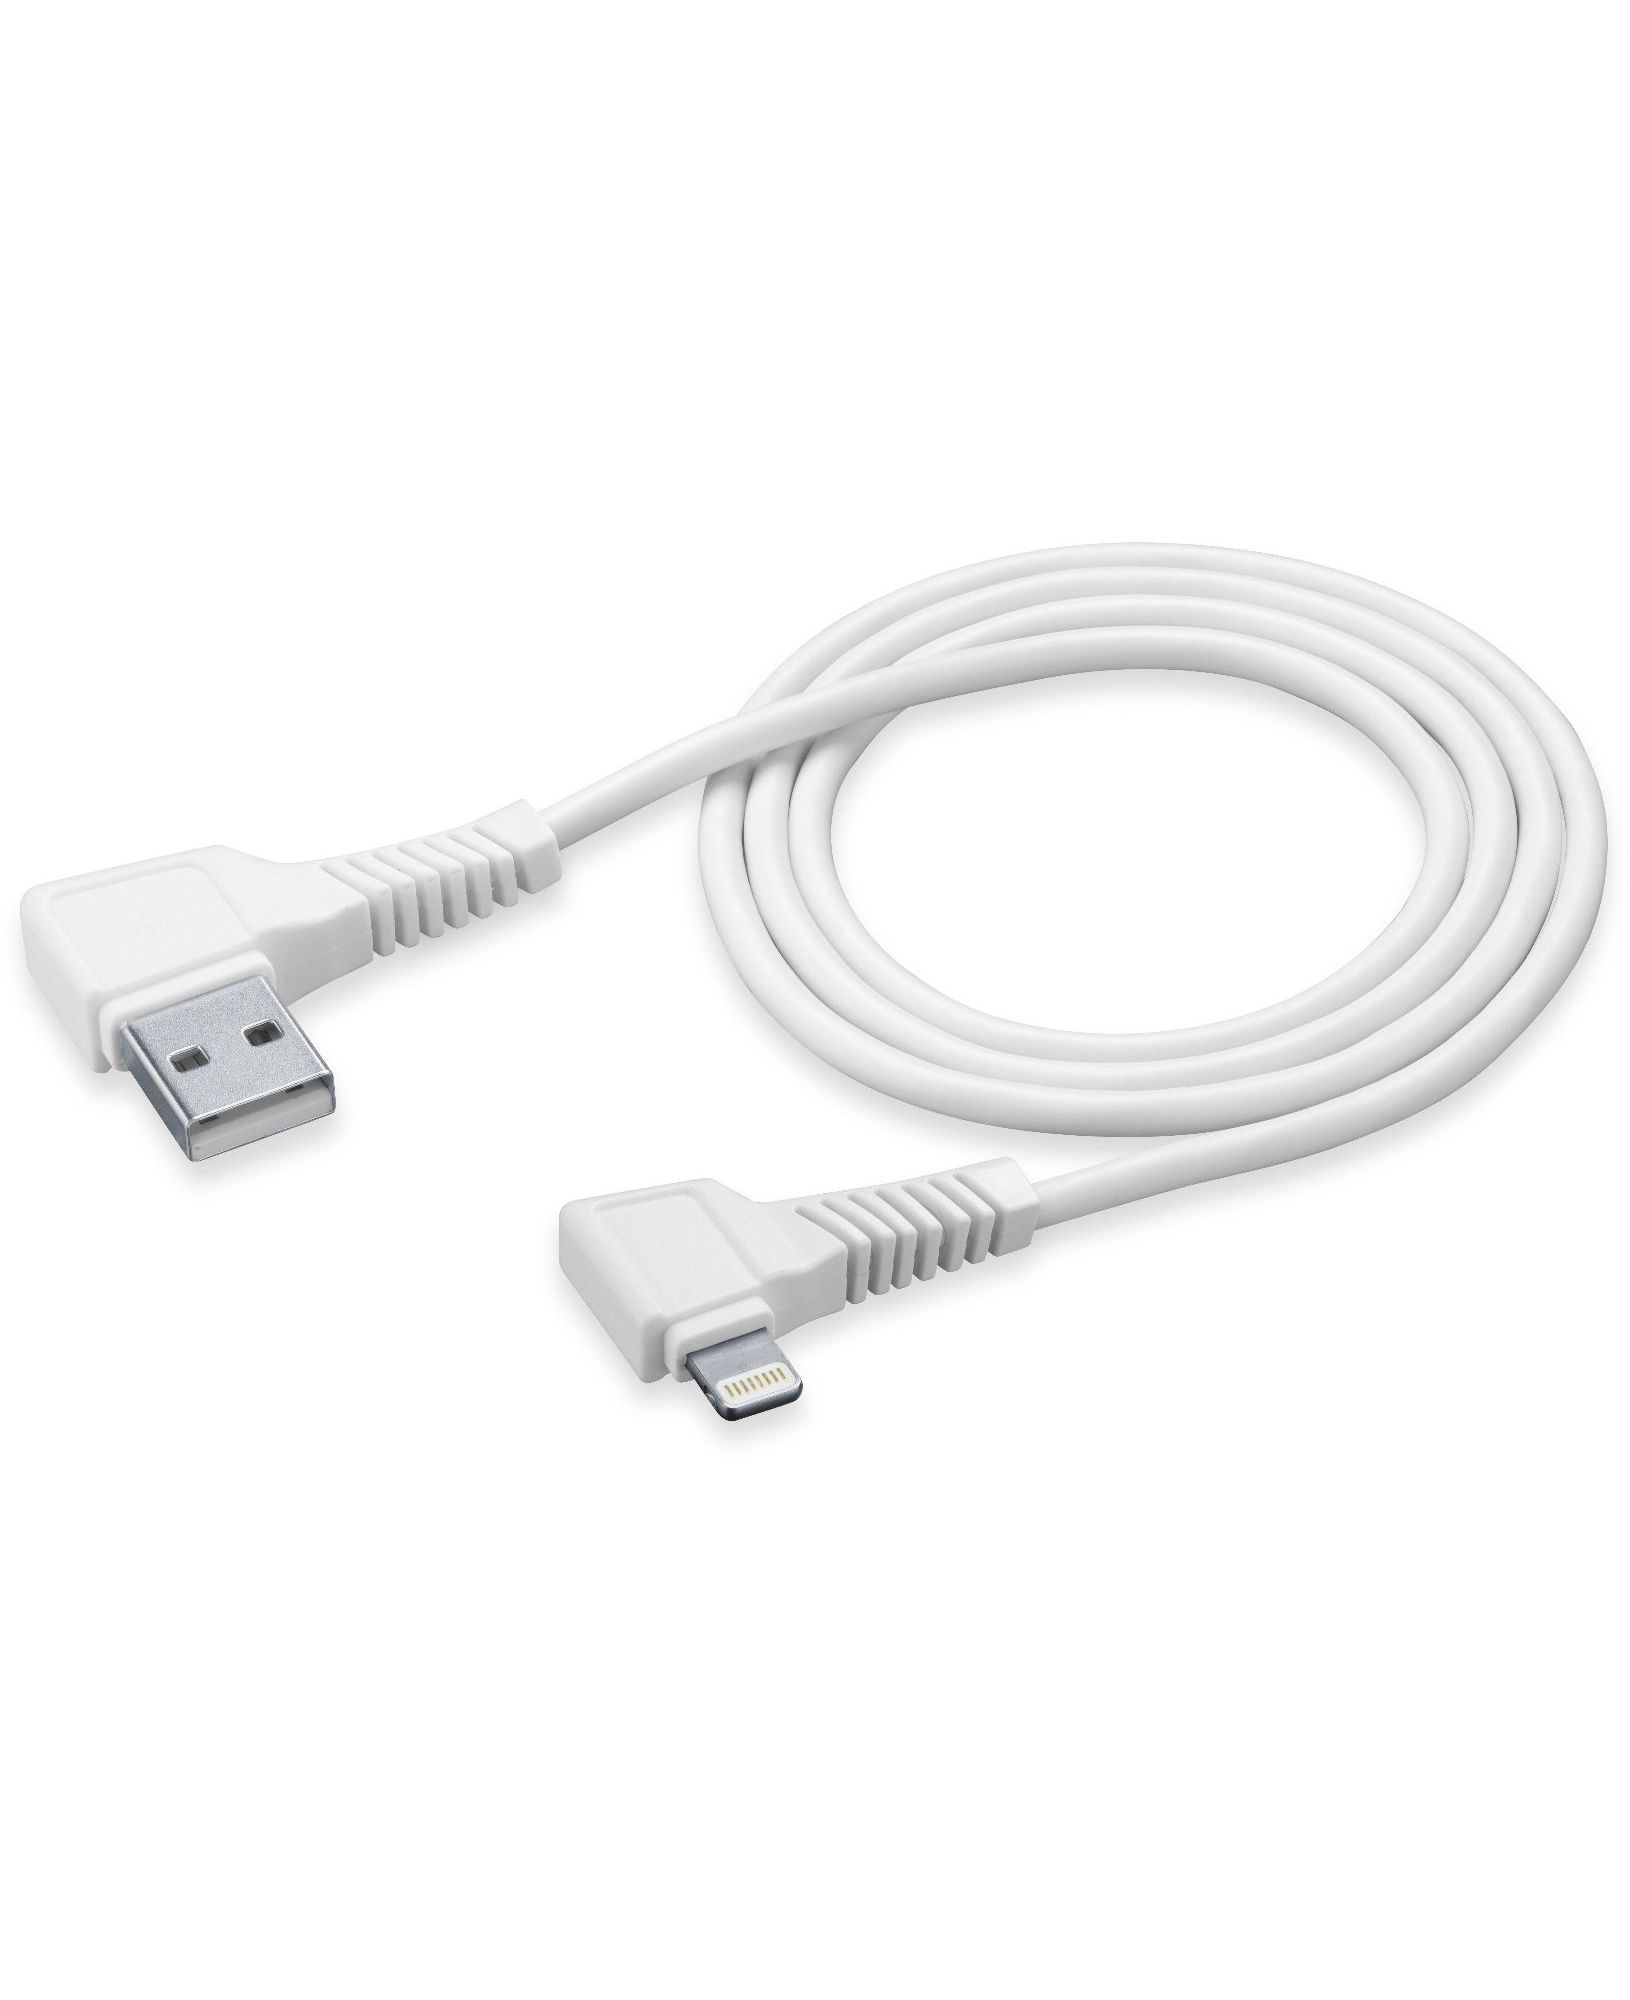 Usb cable, Apple lightning square connector 1,2m, white